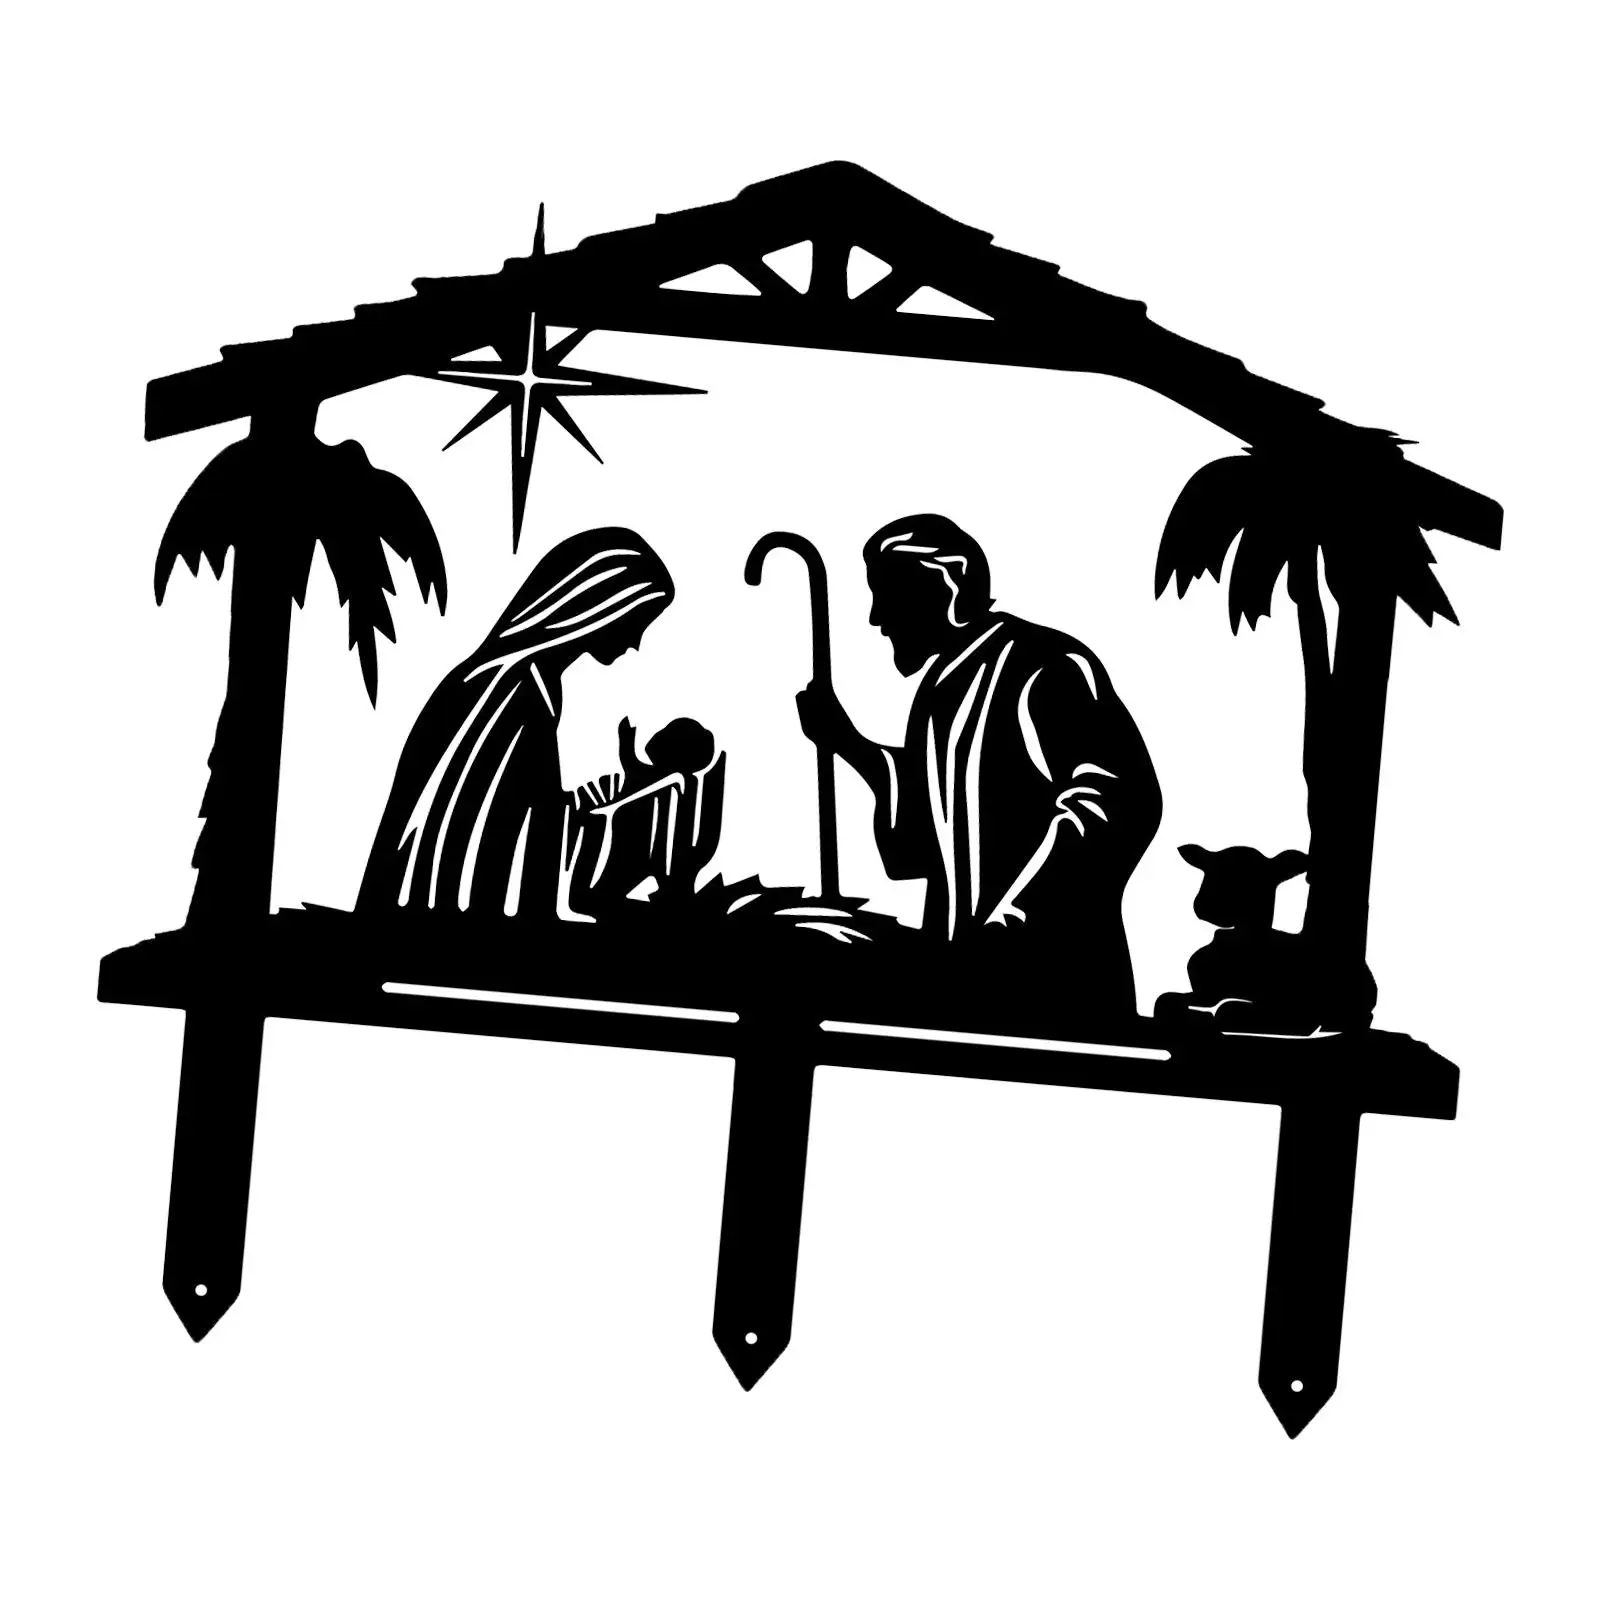 Nativity Scene Garden Stakes Nativity Scene Yard Display Silhouette Stake Metal Yard Sign for Outdoor Winter Holiday Party Xmas